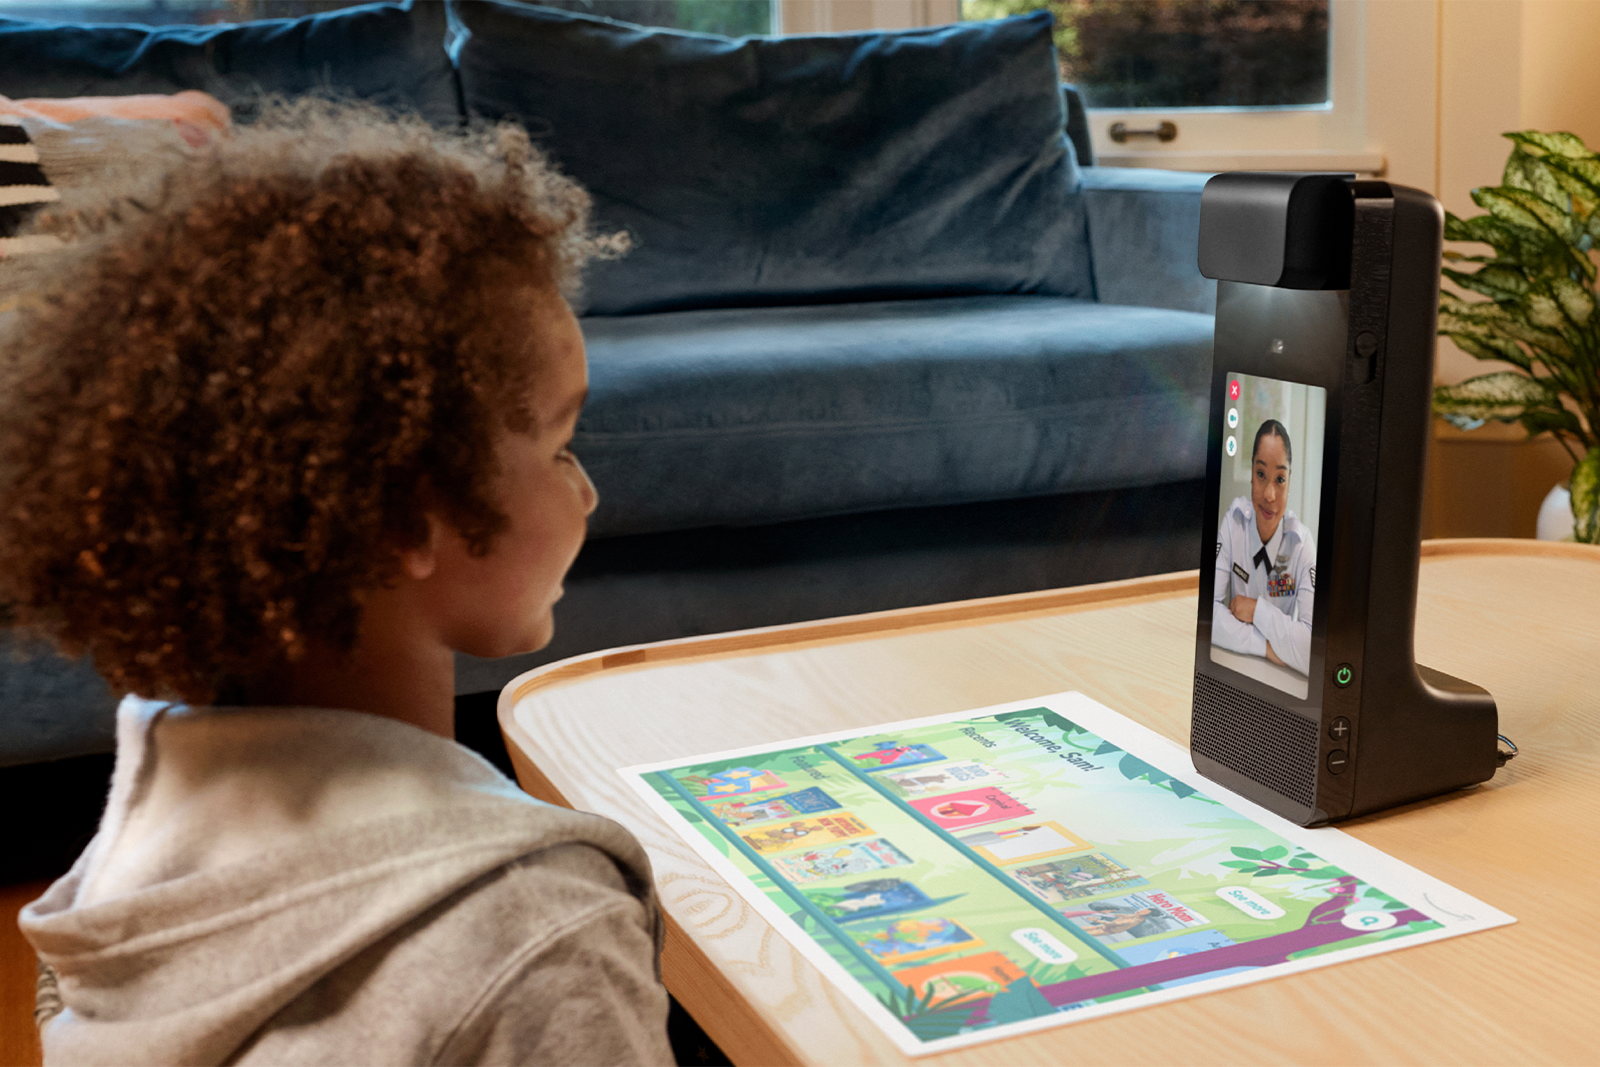 Amazon Glow is a projector to help your kids have better video calls photo 4